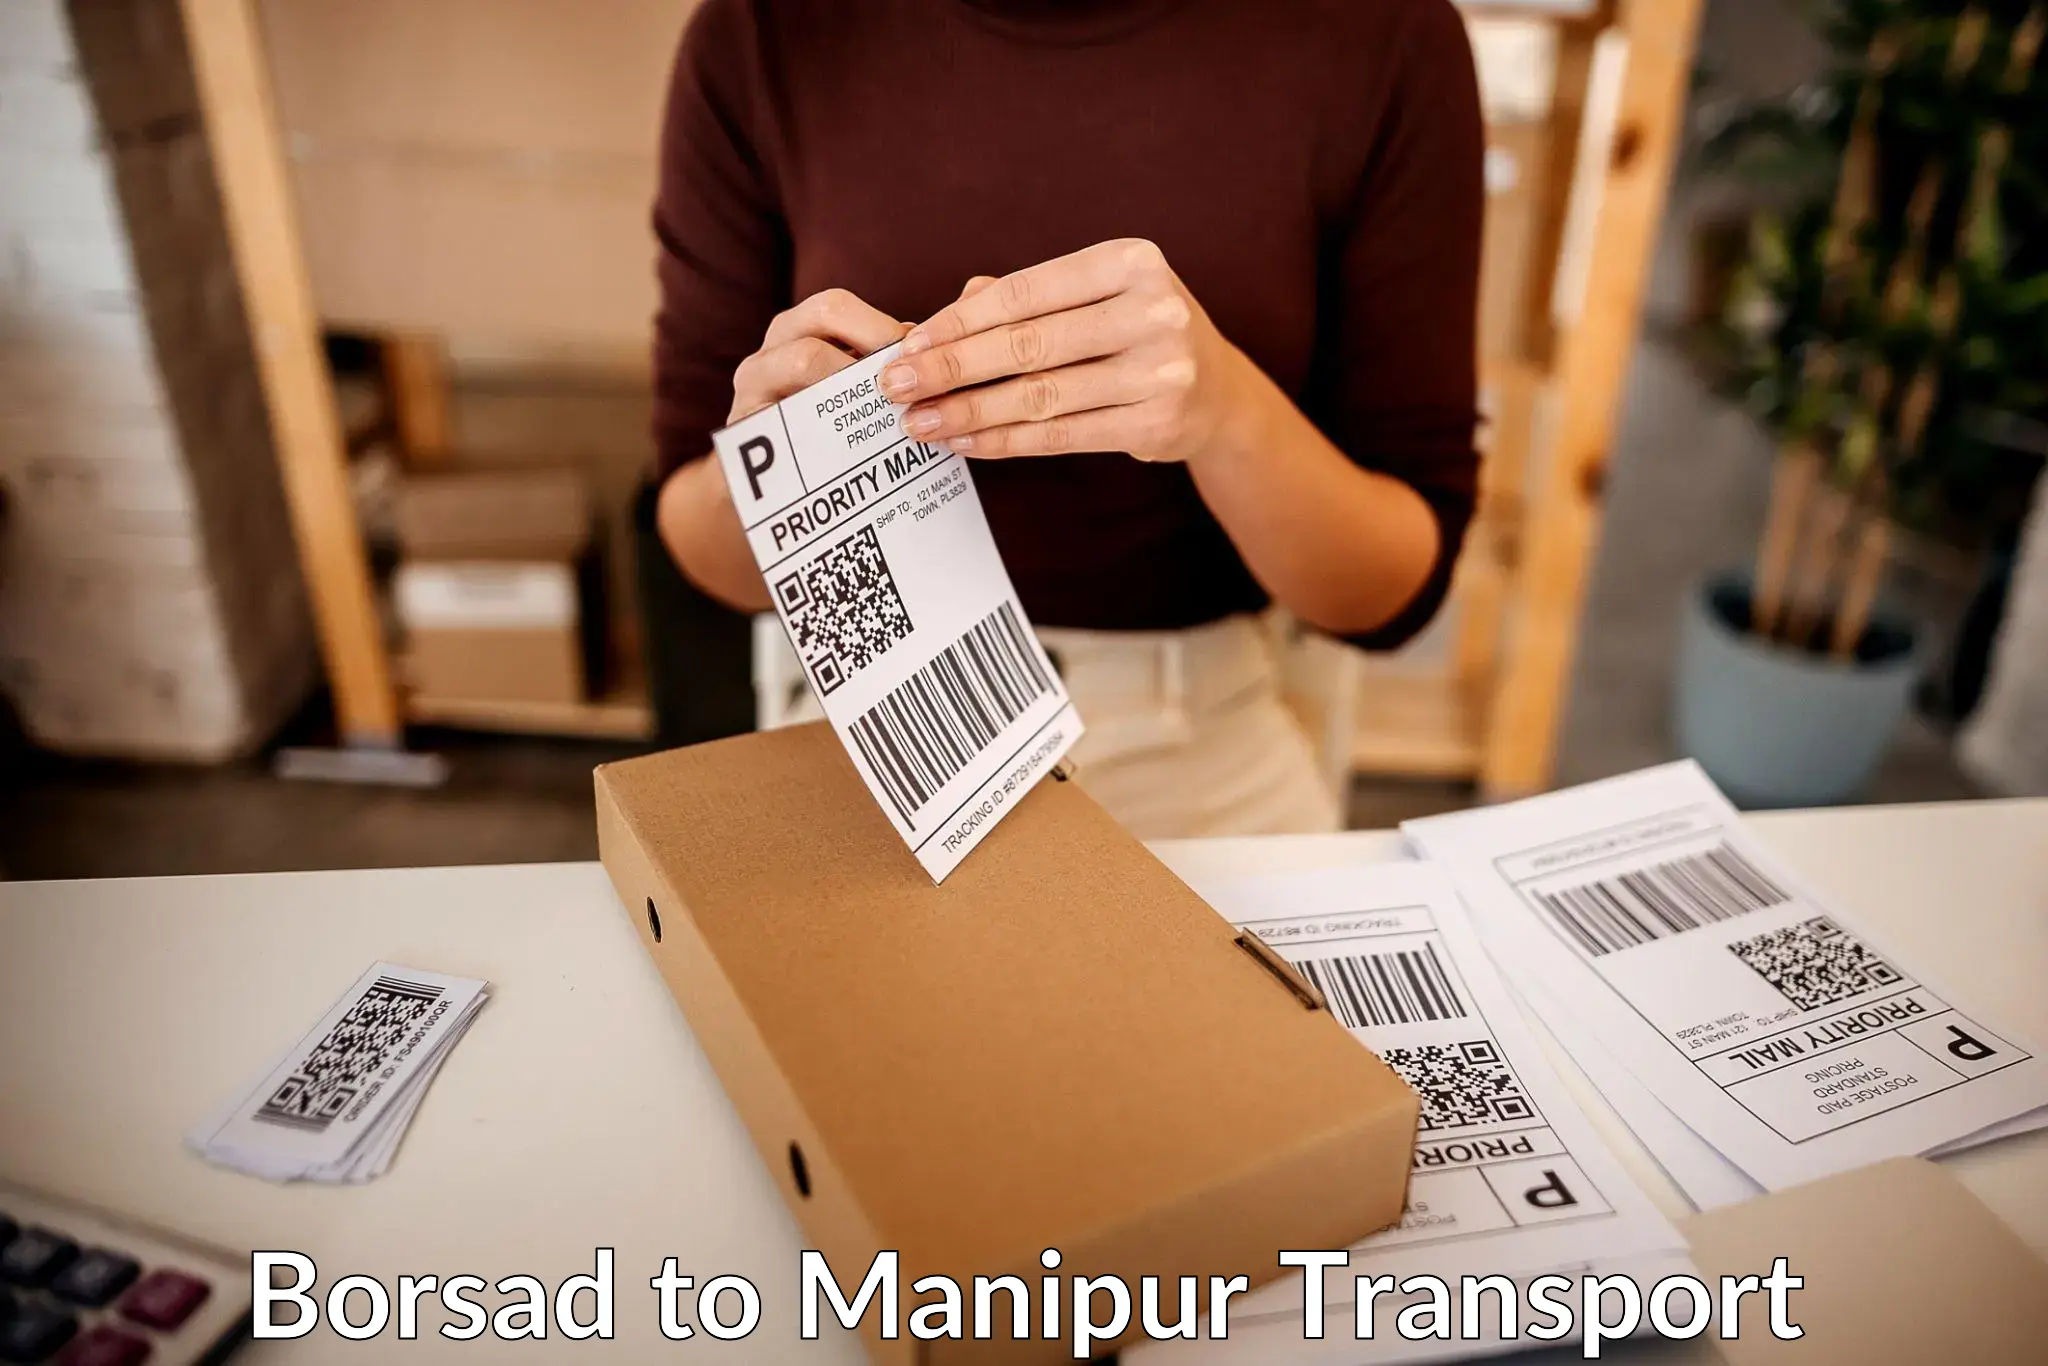 Commercial transport service Borsad to Manipur